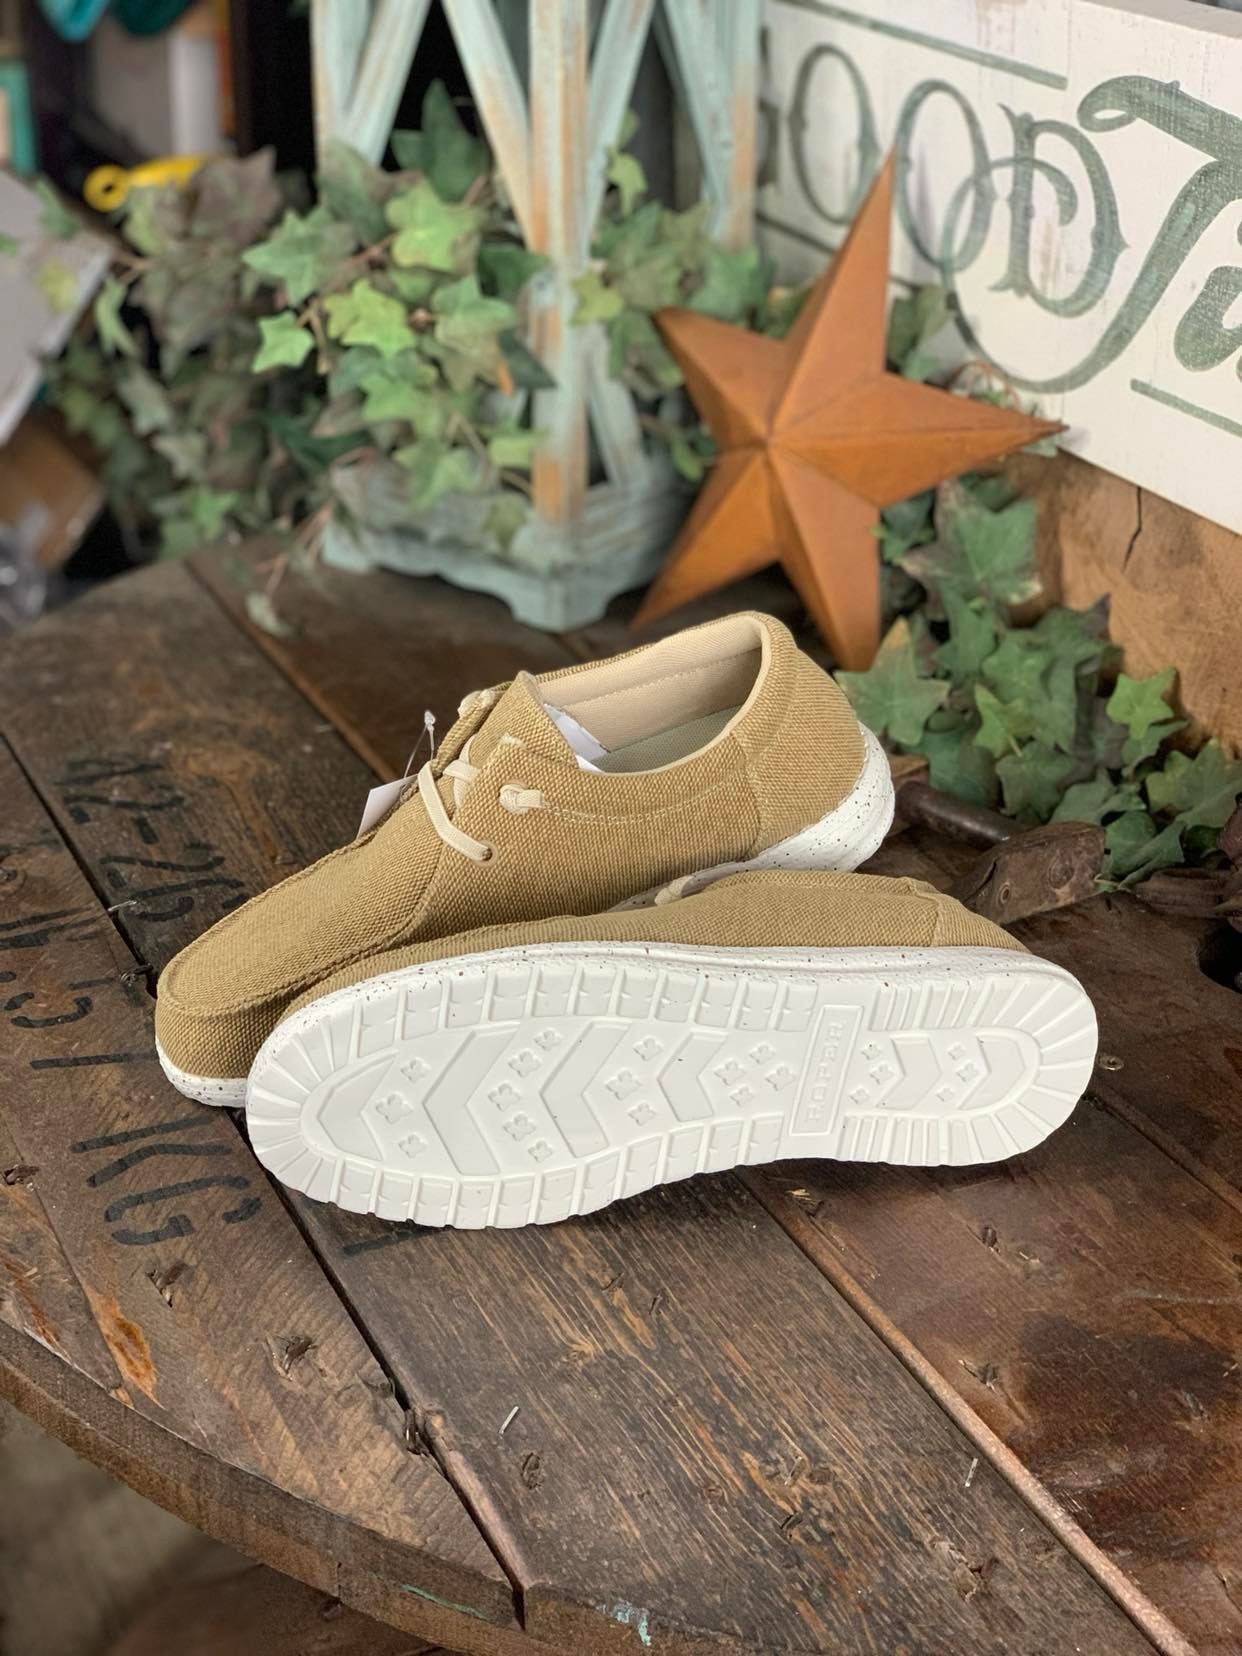 Mens Roper Hang Loose Sneaker in Tan-Men's Shoes-Roper-Lucky J Boots & More, Women's, Men's, & Kids Western Store Located in Carthage, MO